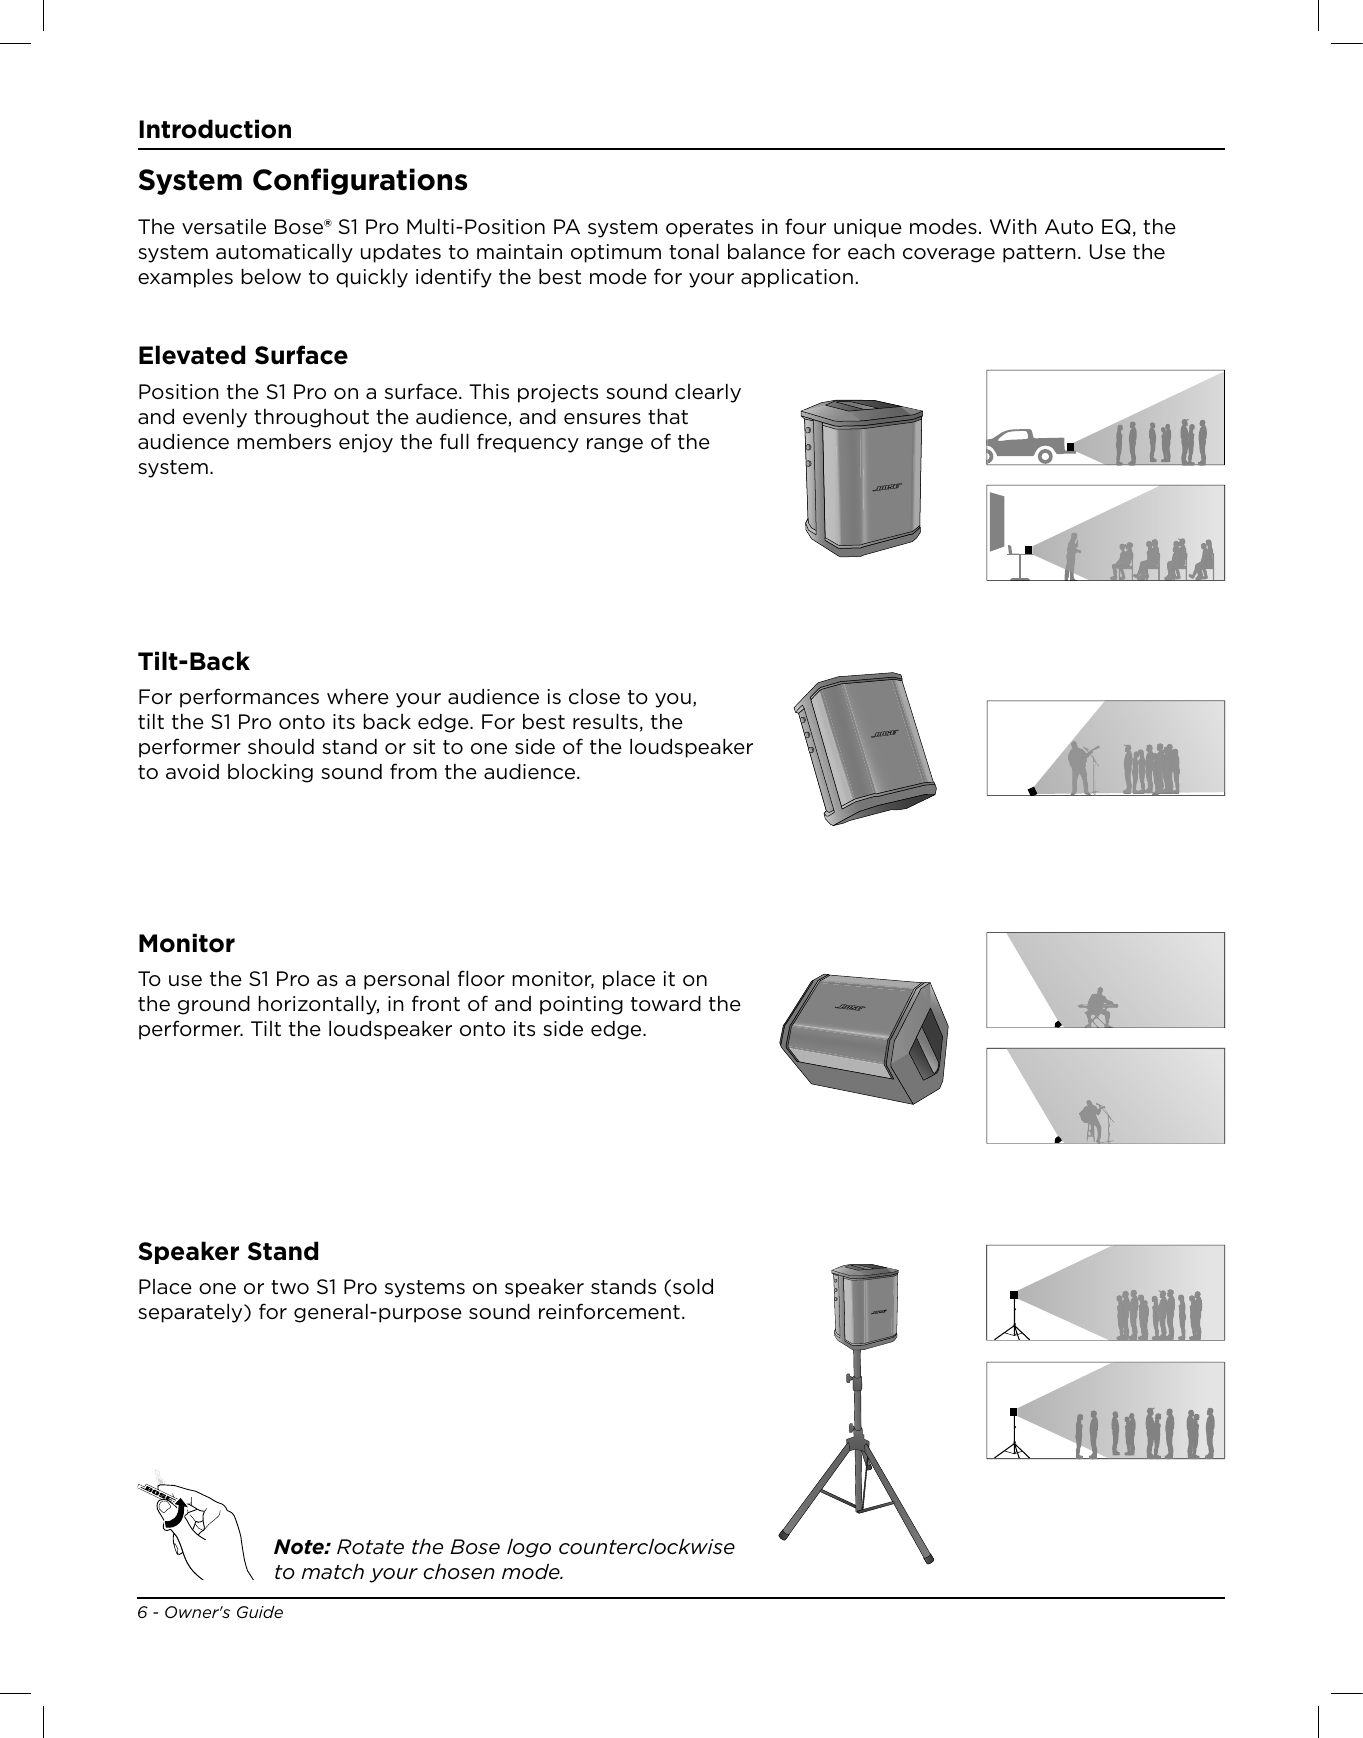 Introduction6 - Owner&apos;s GuideSystem ConﬁgurationsThe versatile Bose® S1 Pro Multi-Position PA system operates in four unique modes. With Auto EQ, the system automatically updates to maintain optimum tonal balance for each coverage pattern. Use the examples below to quickly identify the best mode for your application.Elevated SurfacePosition the S1 Pro on a surface. This projects sound clearly and evenly throughout the audience, and ensures that audience members enjoy the full frequency range of the system.Speaker StandPlace one or two S1 Pro systems on speaker stands (sold separately) for general-purpose sound reinforcement. MonitorTo use the S1 Pro as a personal ﬂoor monitor, place it on the ground horizontally, in front of and pointing toward the performer. Tilt the loudspeaker onto its side edge.Tilt-BackFor performances where your audience is close to you, tilt the S1 Pro onto its back edge. For best results, the performer should stand or sit to one side of the loudspeaker to avoid blocking sound from the audience.Note: Rotate the Bose logo counterclockwise to match your chosen mode.